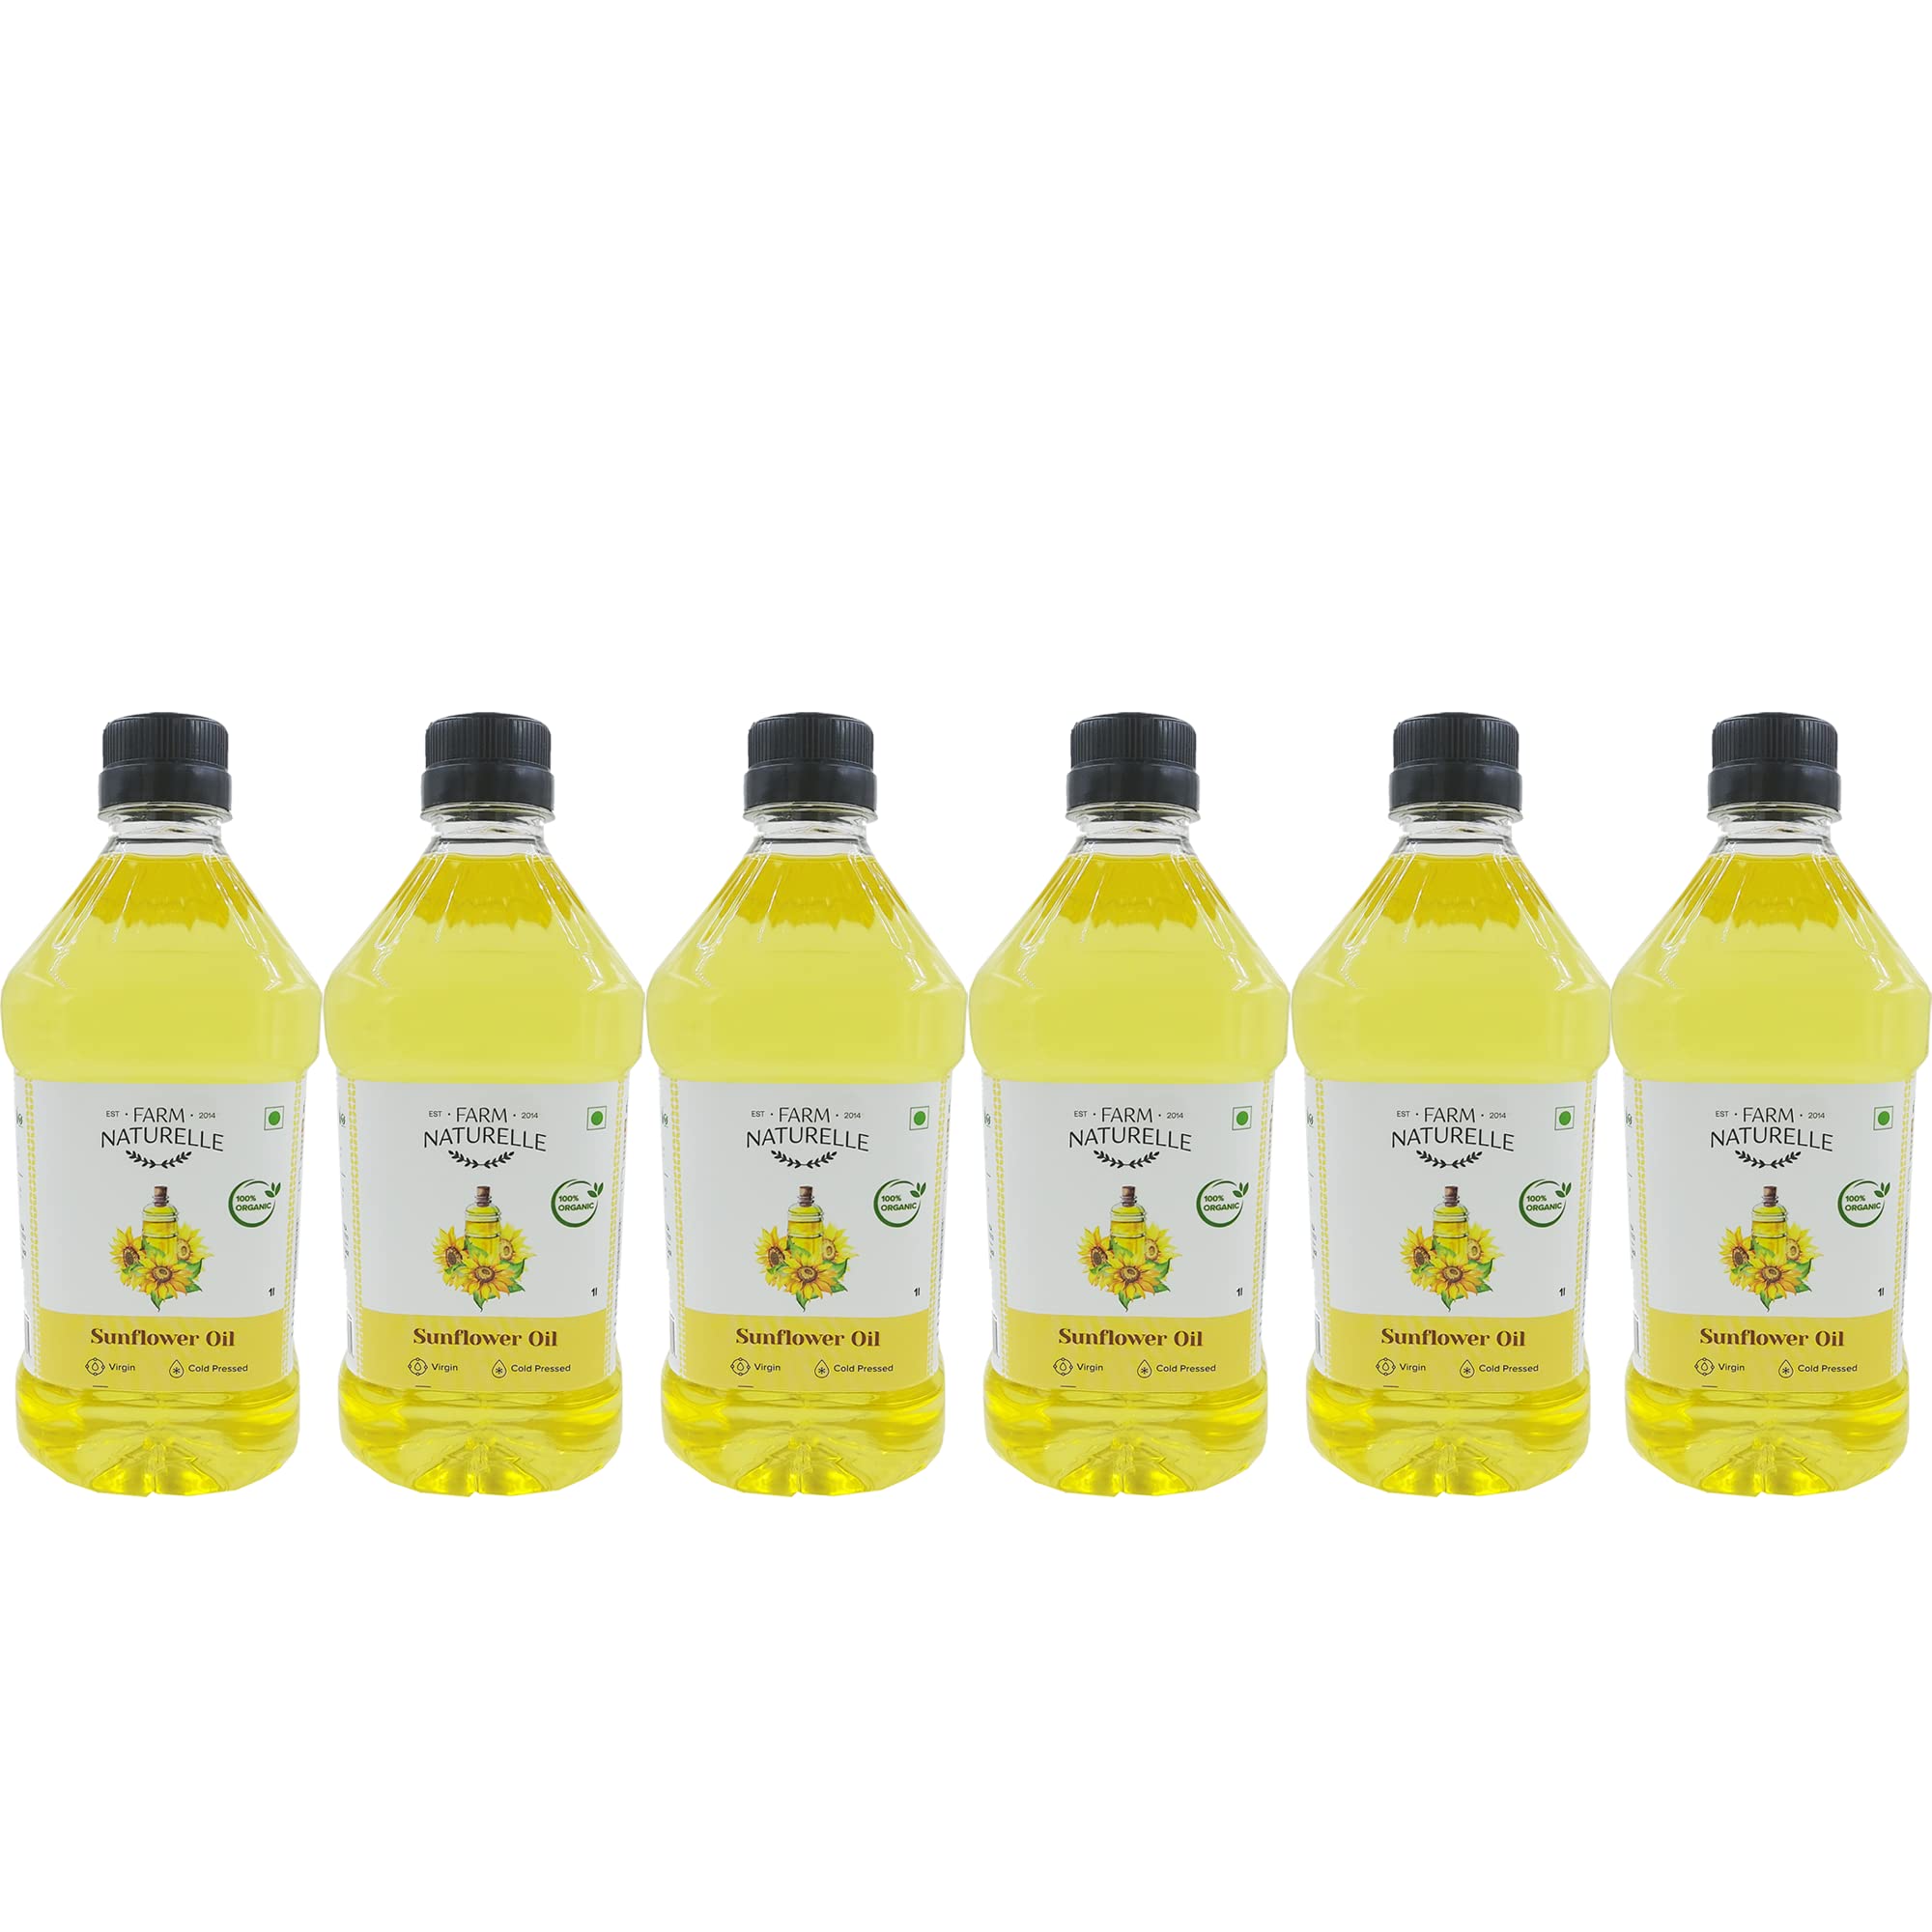 Farm Naturelle (Farm Natural Produce) Organic Cold Pressed Sun Flower (Sunflower) Cooking Oil (Pack of 6 x 1Ltr )